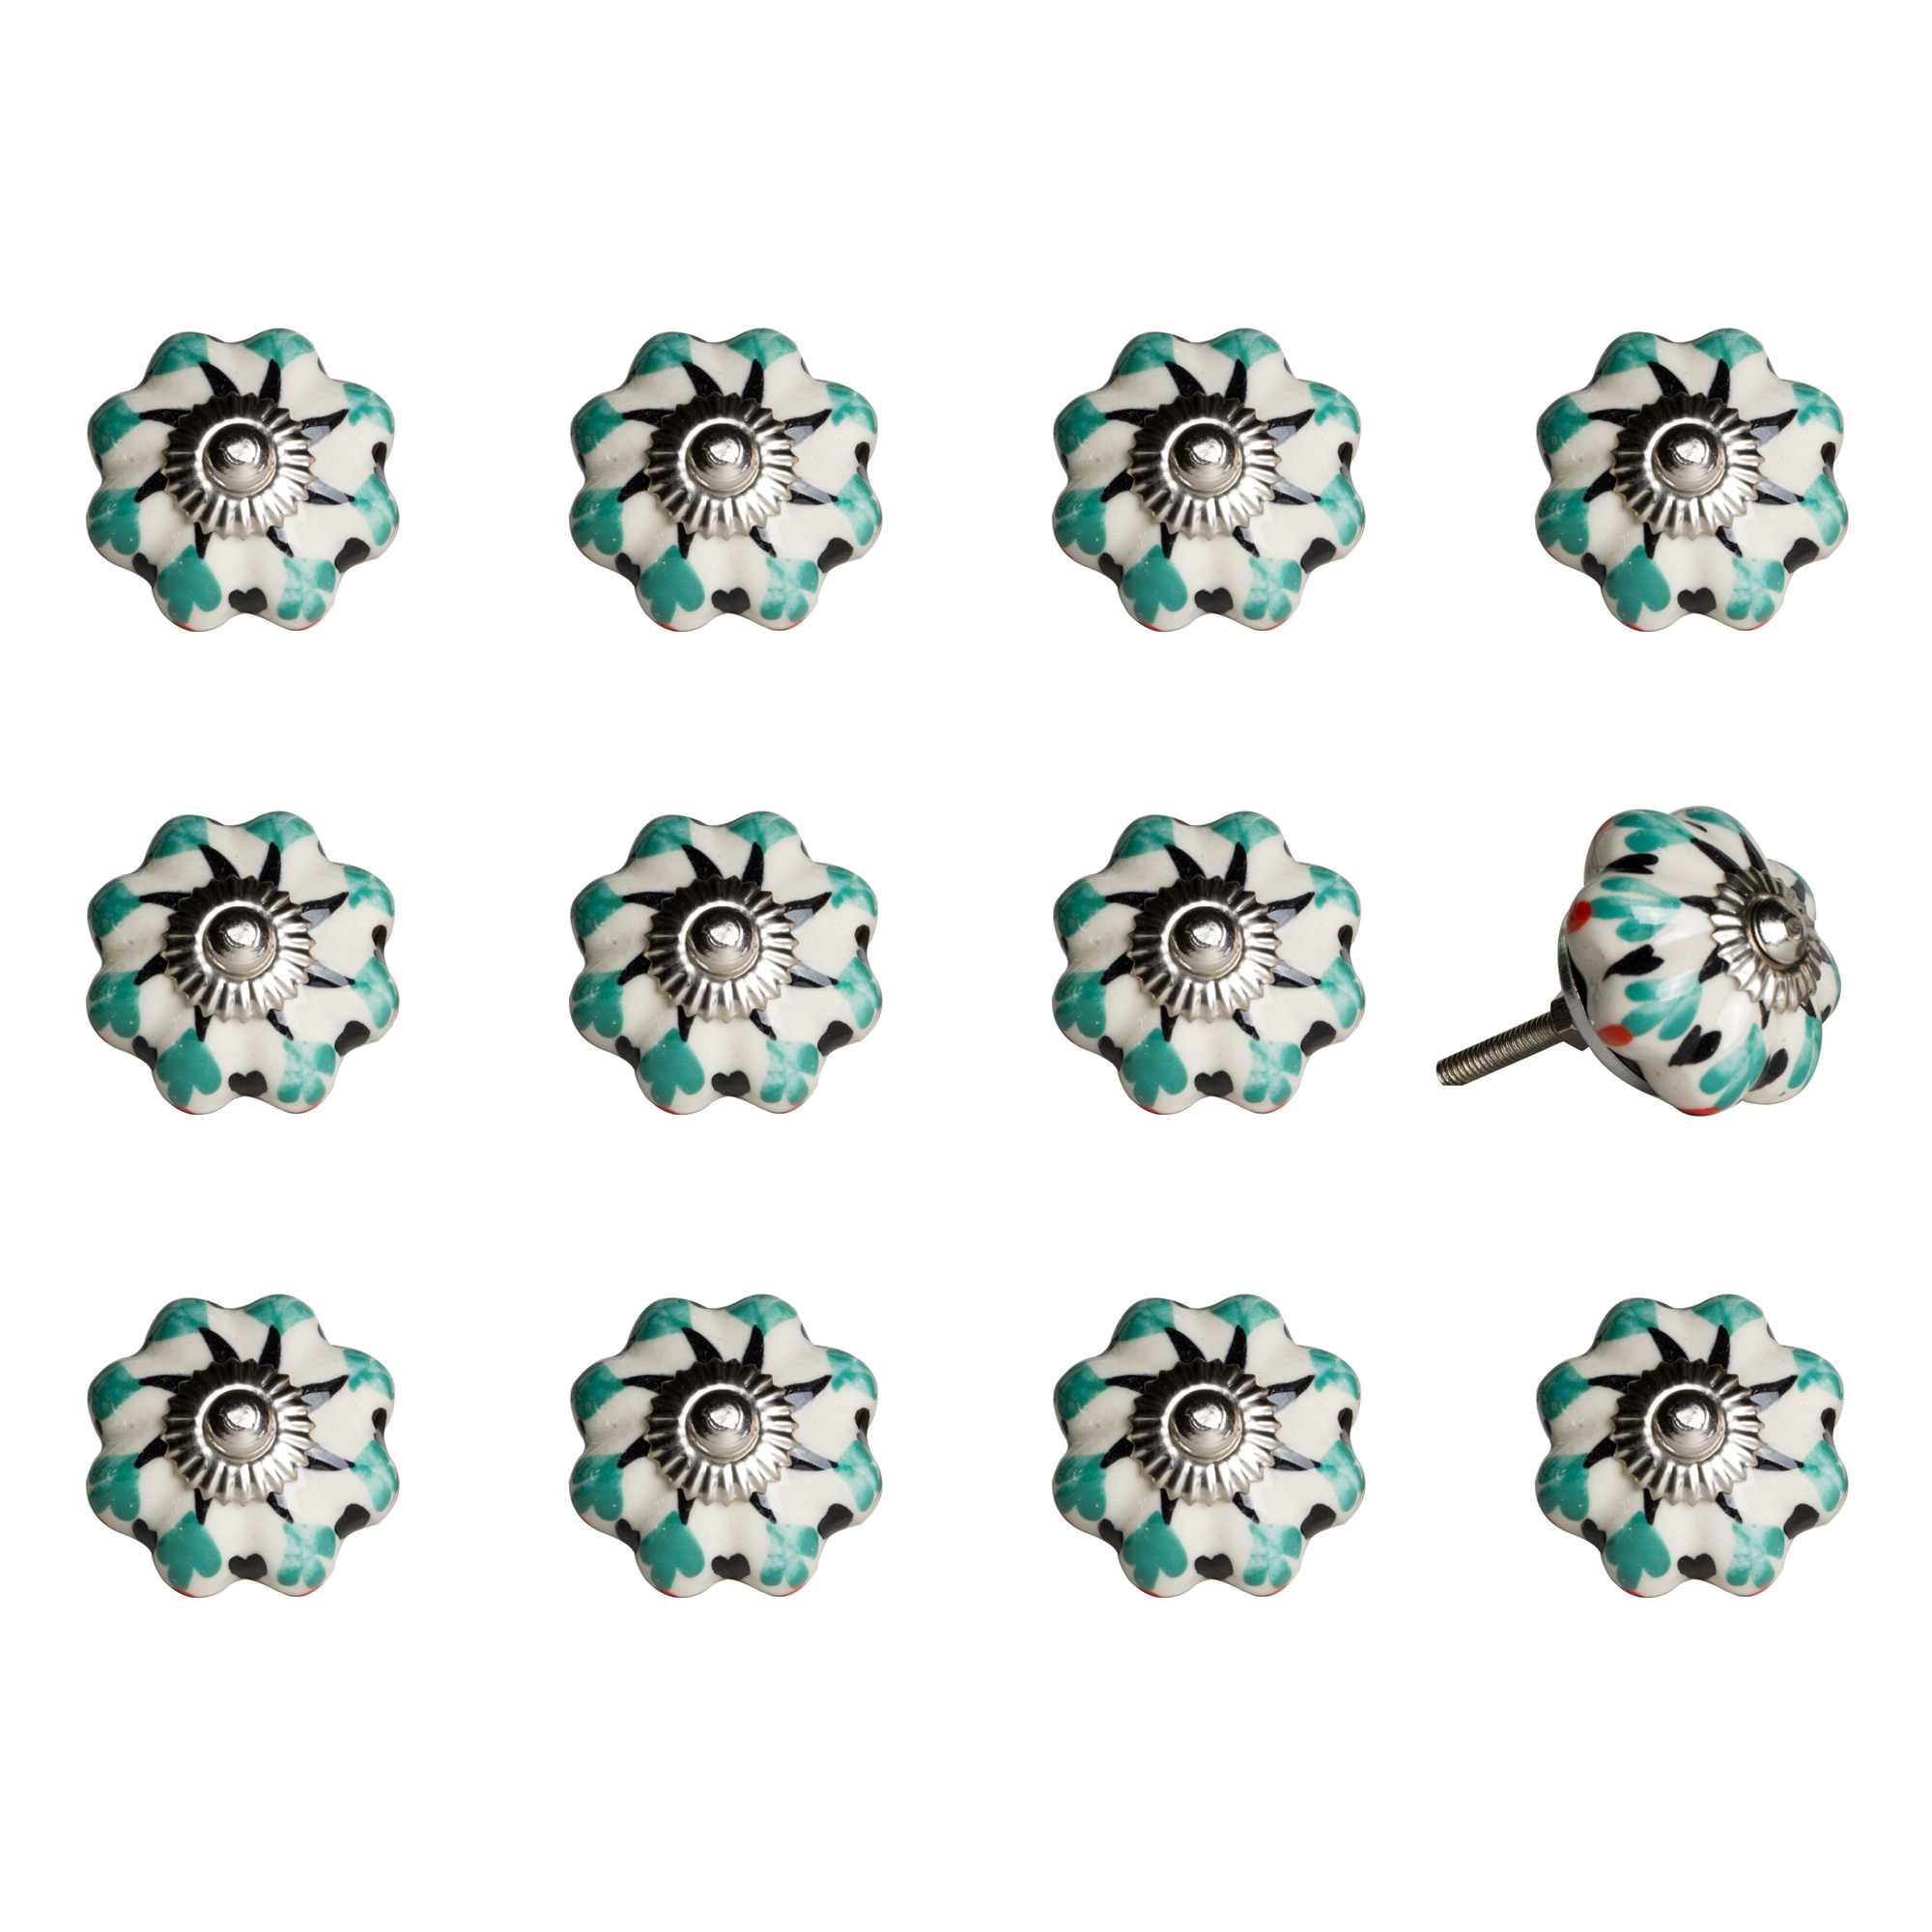 1.5" x 1.5" x 1.5" White, Green and Black - Knobs 12-Pack